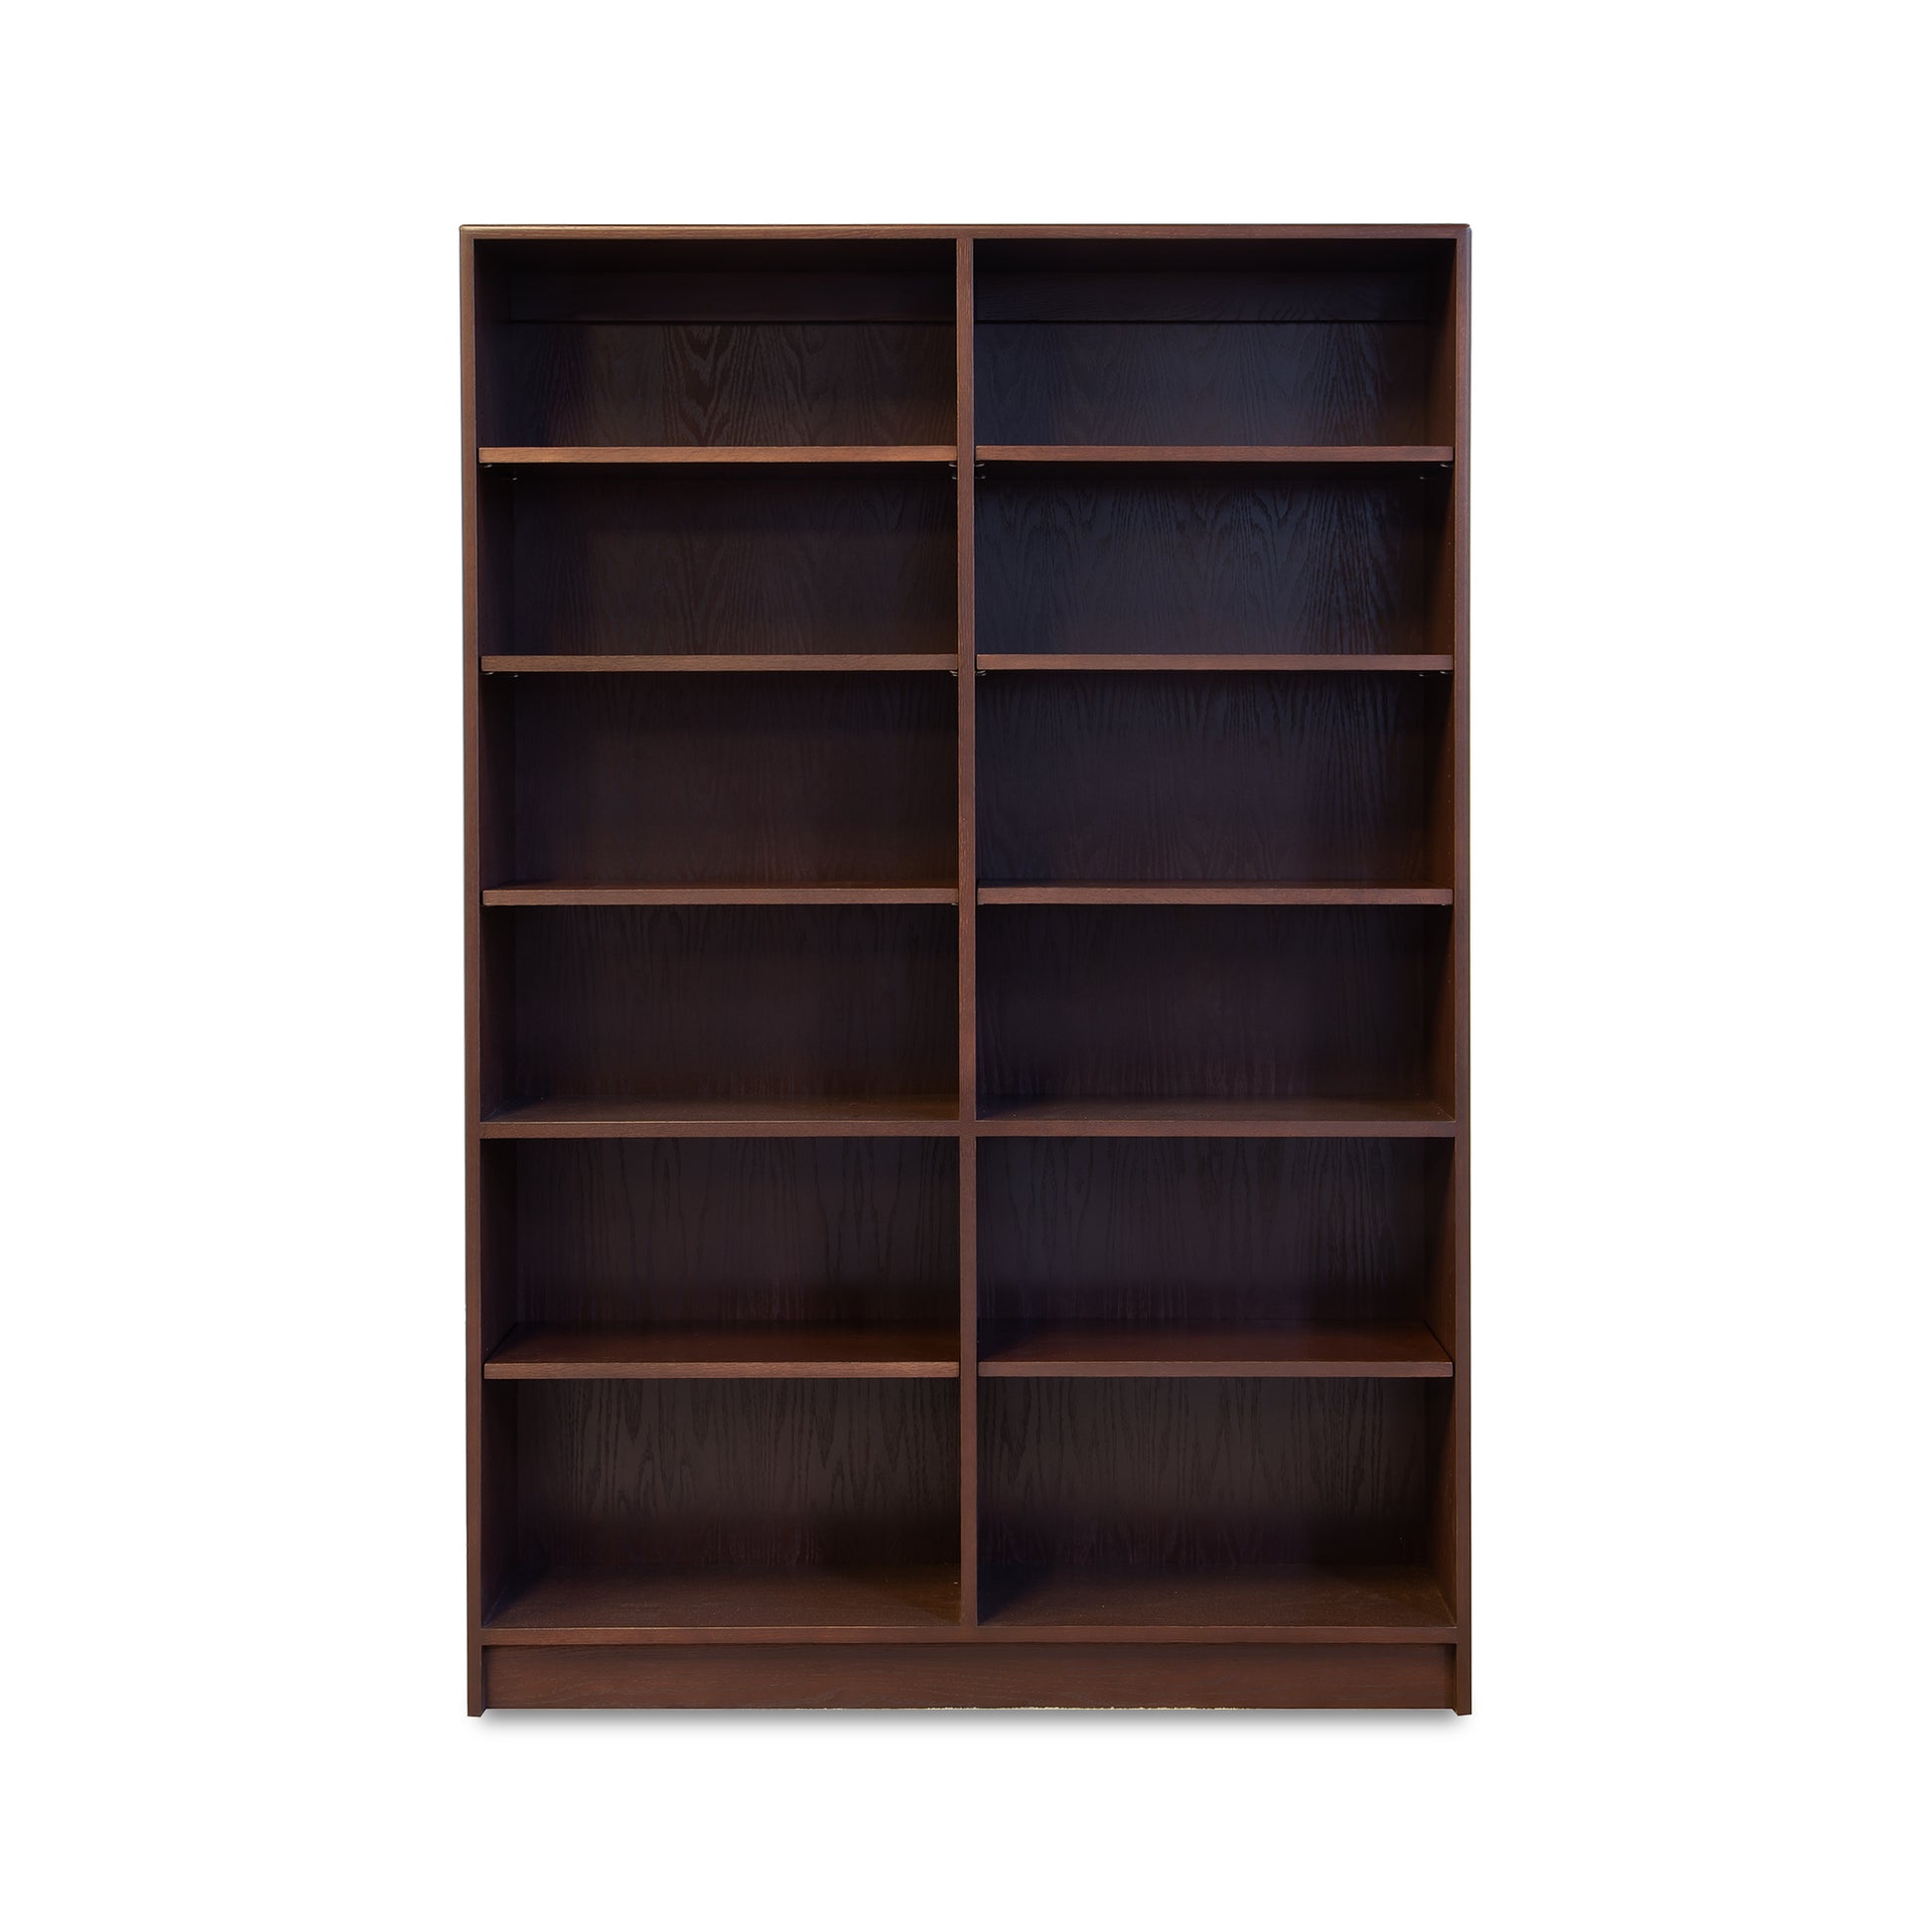 A Lyndon Furniture Custom Contemporary Wide Bookcase - 72" High - Clearance on a white background.